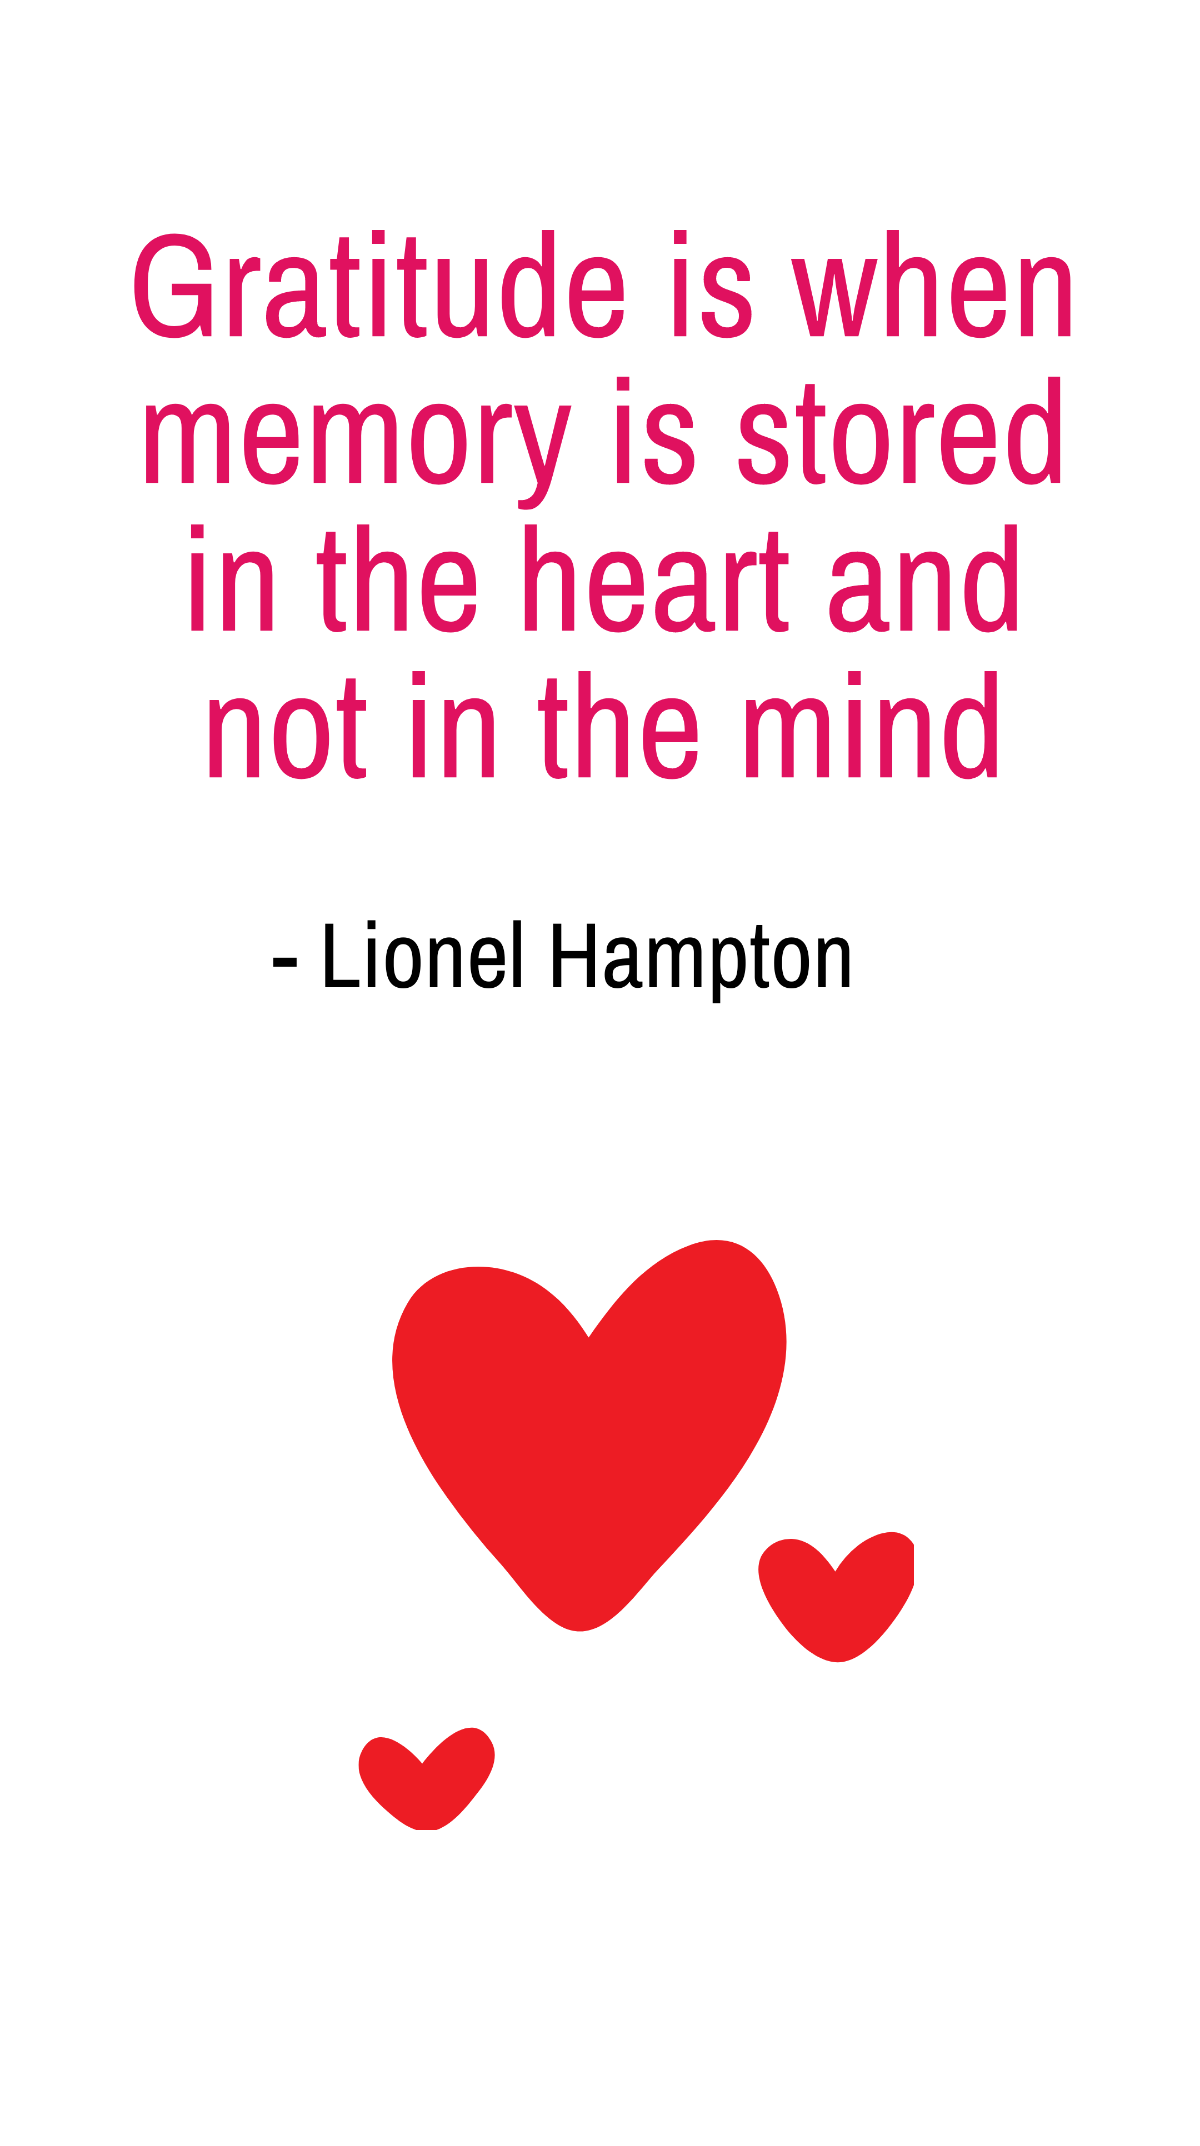 Lionel Hampton - Gratitude is when memory is stored in the heart and not in the mind Template